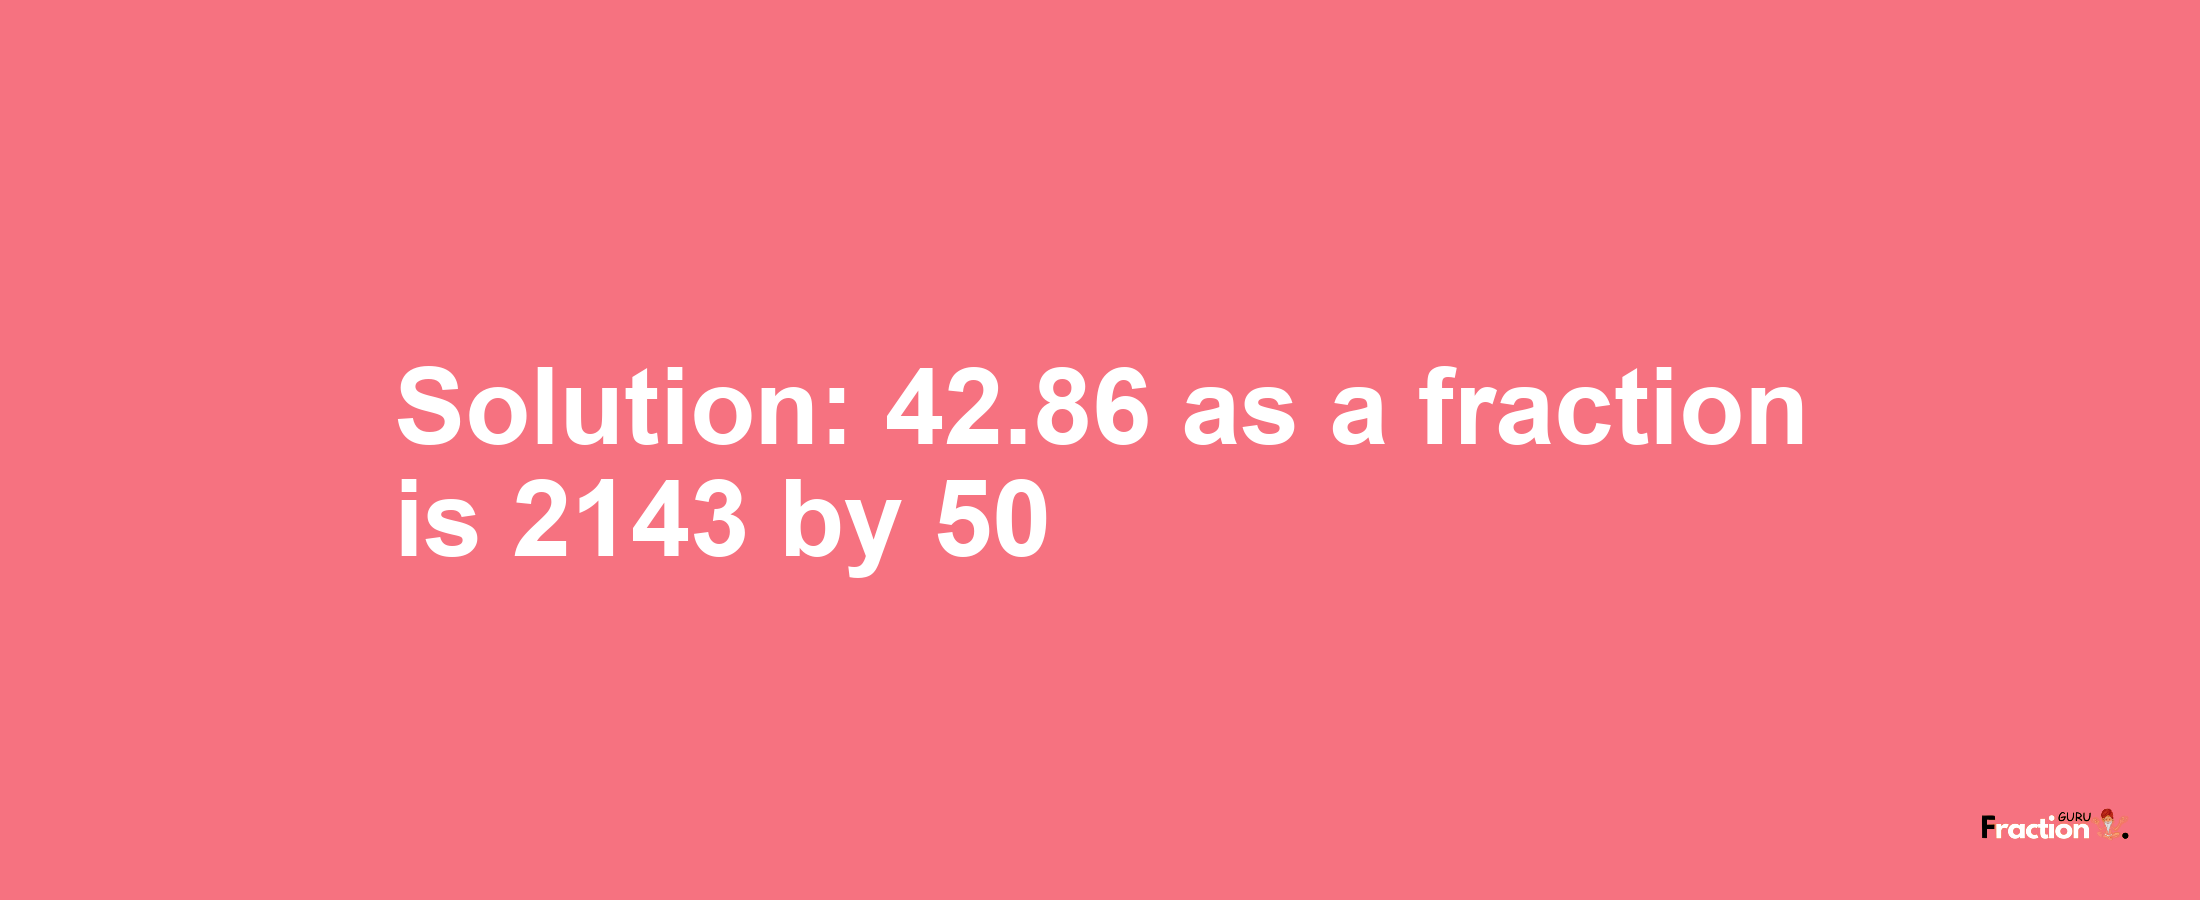 Solution:42.86 as a fraction is 2143/50